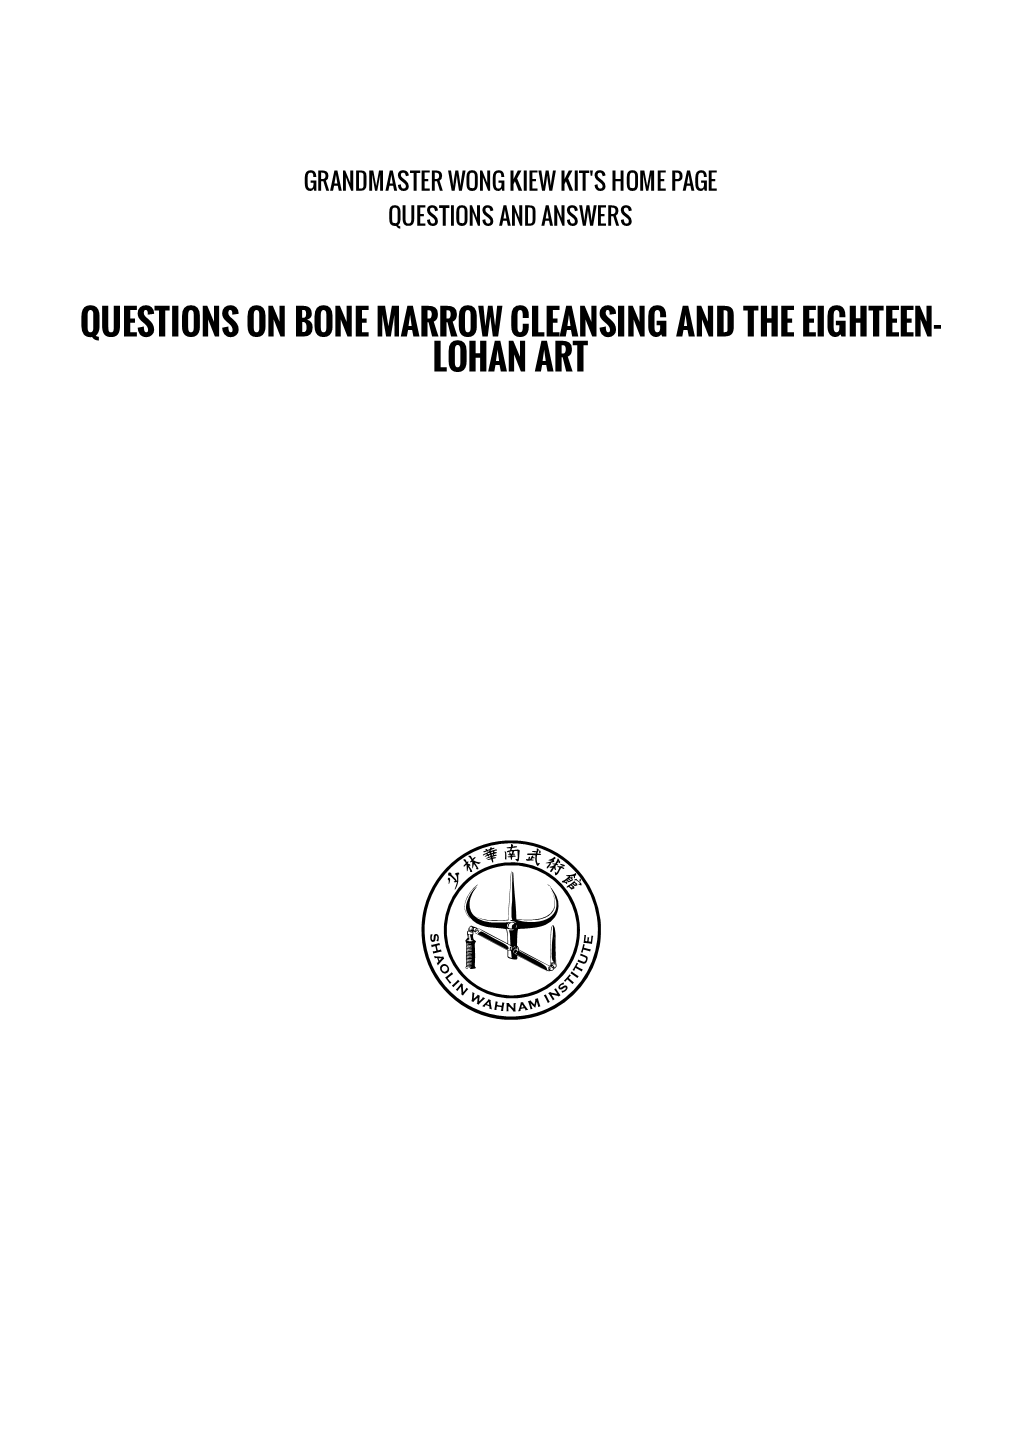 Questions on Bone Marrow Cleansing and the Eighteen-Lohan Art | Questions and Answers | Shaolin.Org